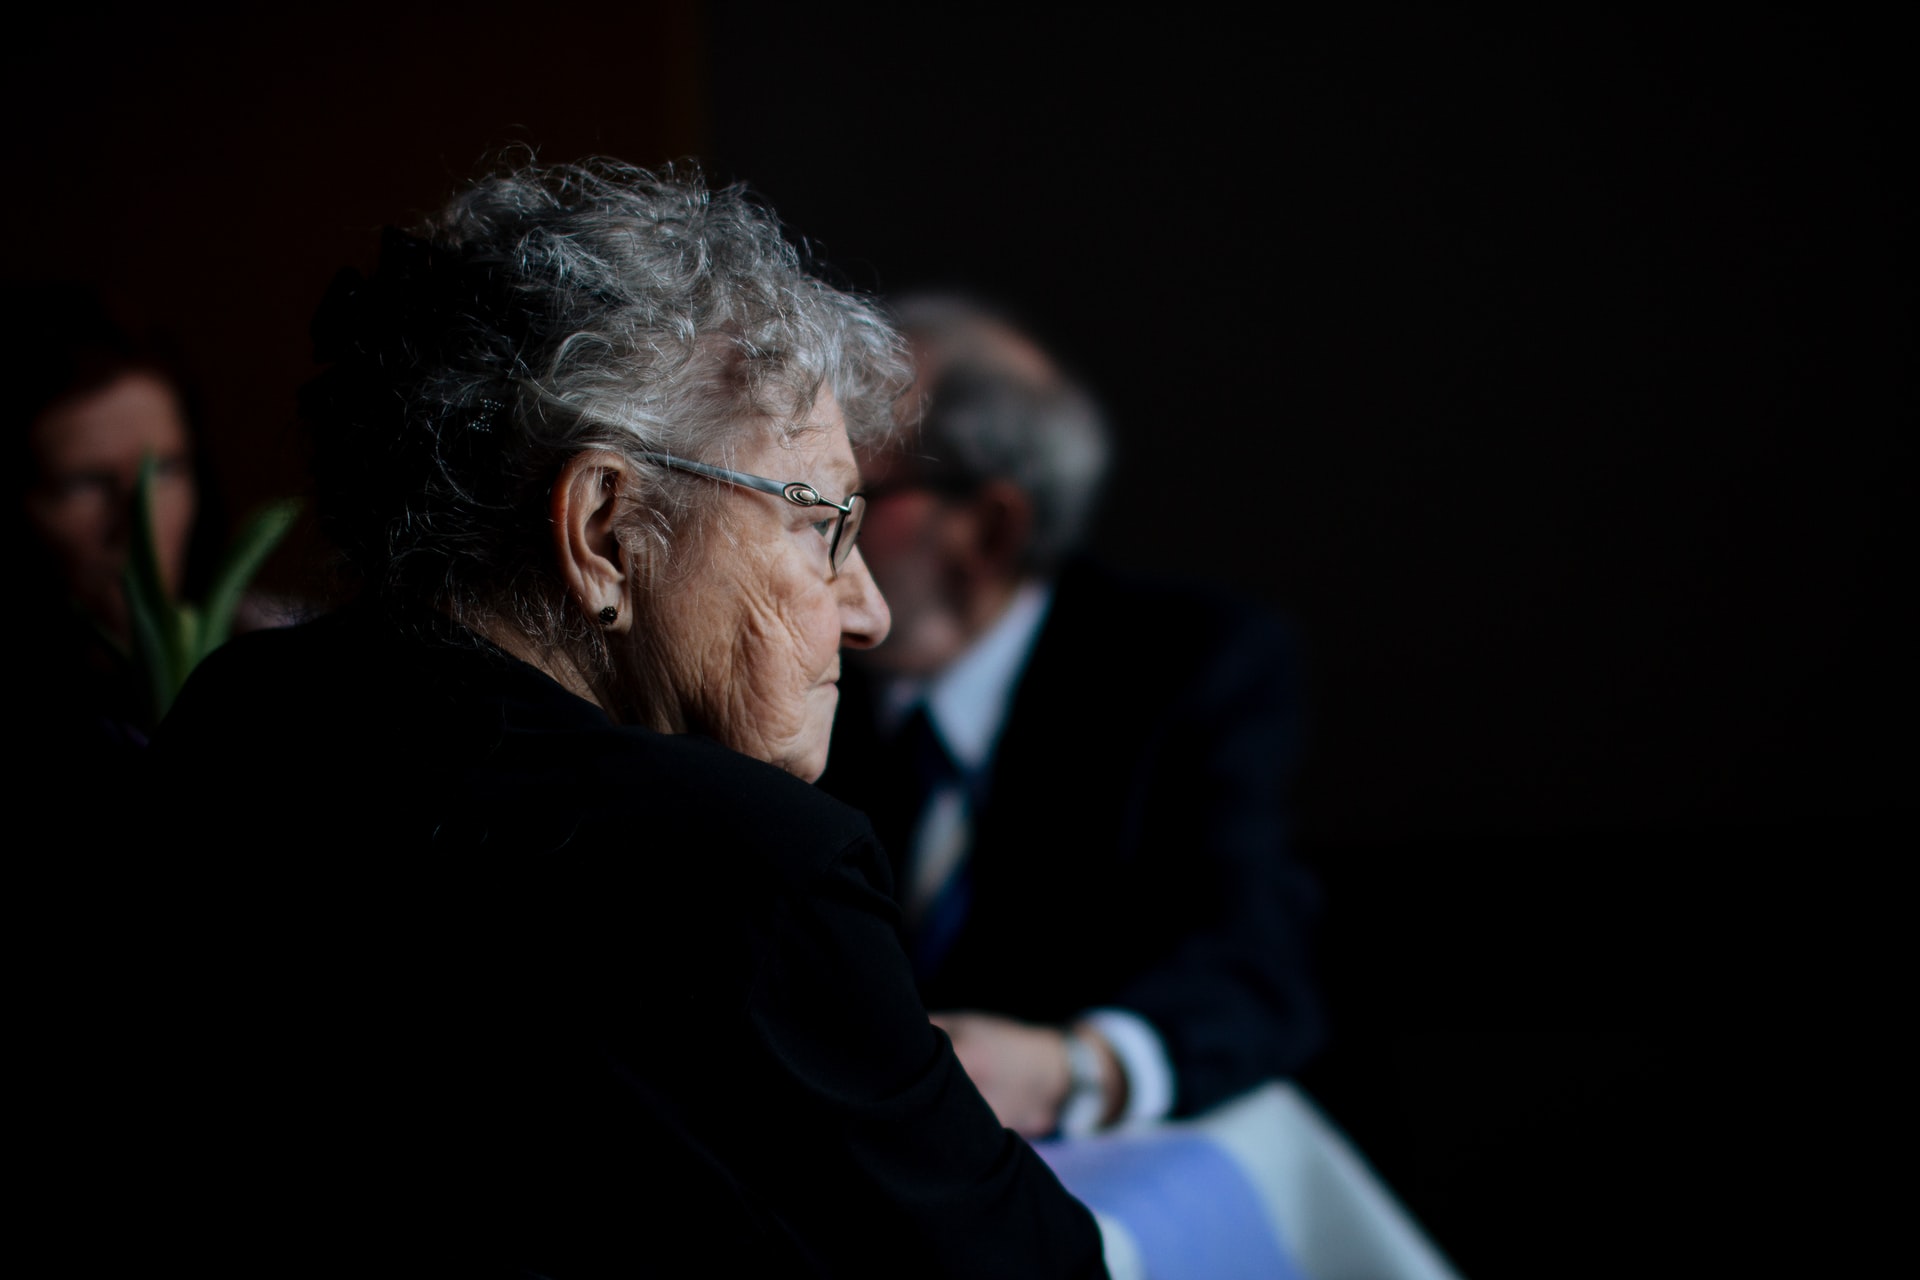 An elderly woman wearing glasses looks to the right.